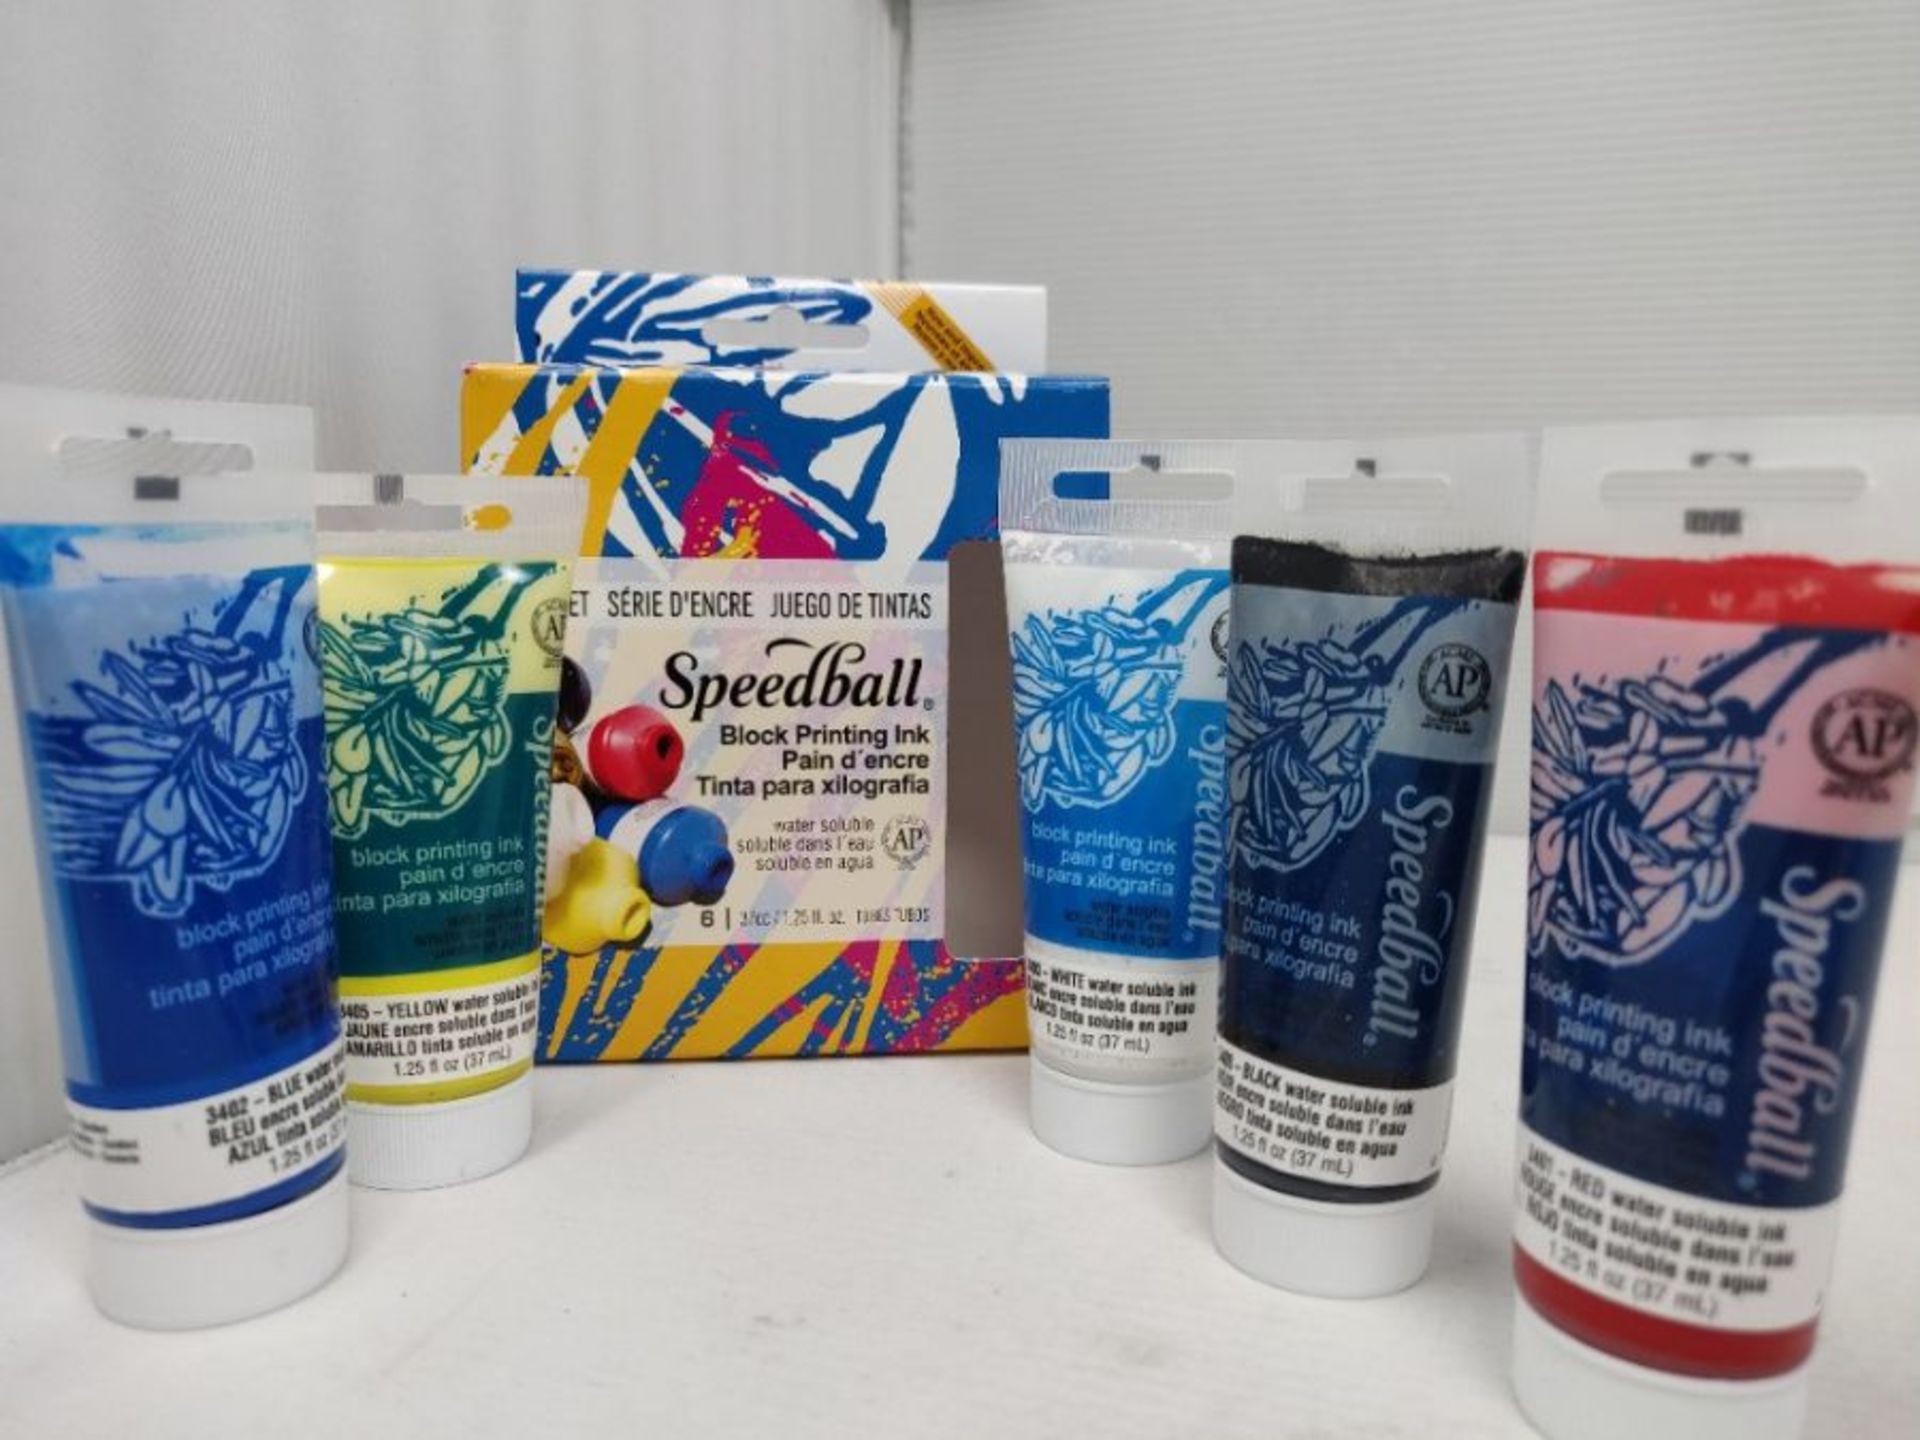 Speedball Water-Soluble Block Printing Ink Starter Set, 6 Bold Colors with Satiny Fini - Image 2 of 2